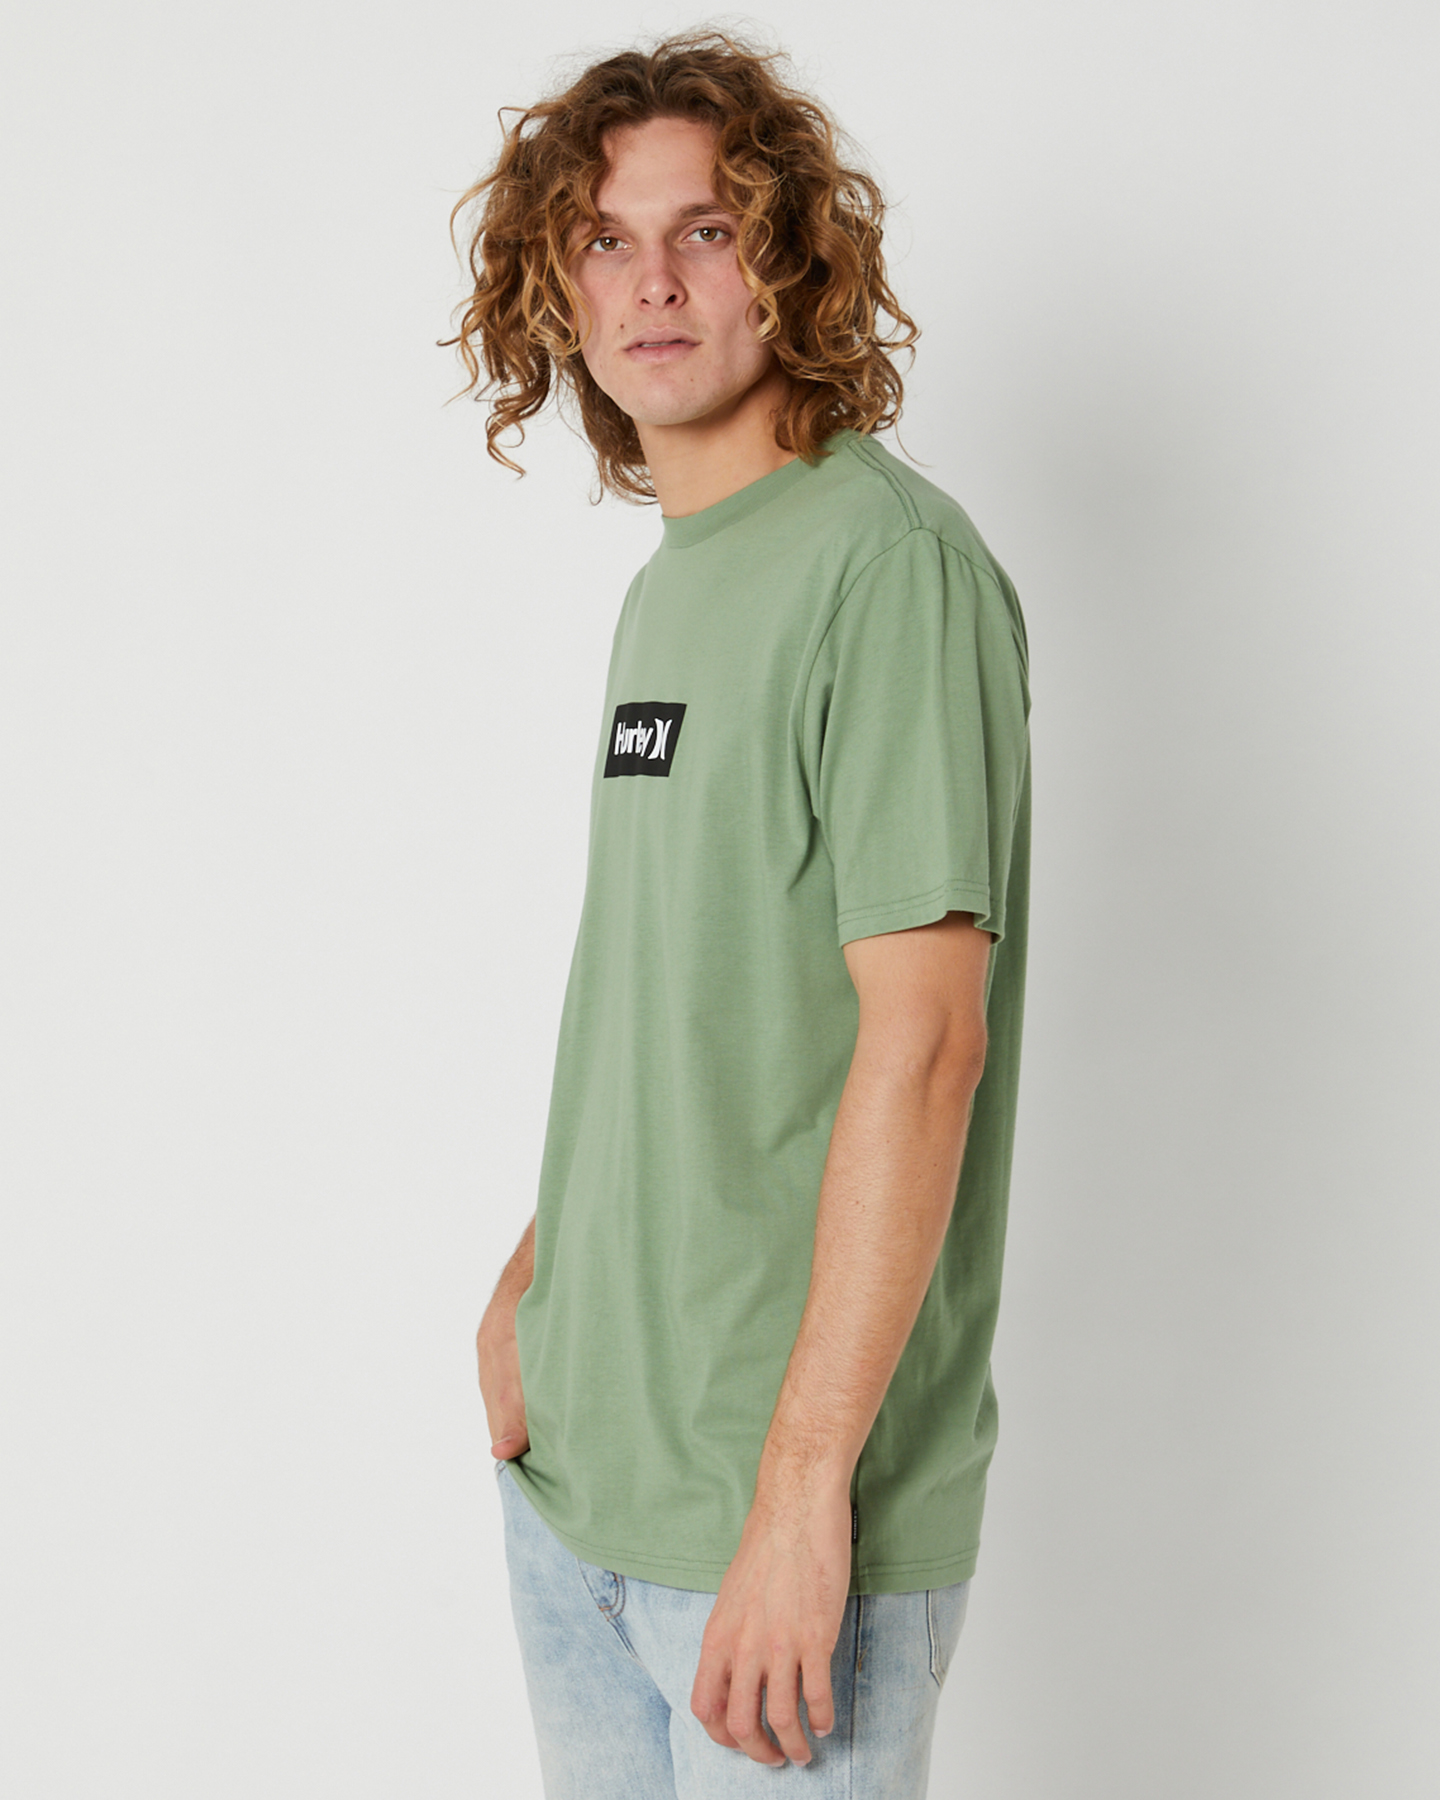 Hurley Box Only Ss Tee - Loden Frost | SurfStitch